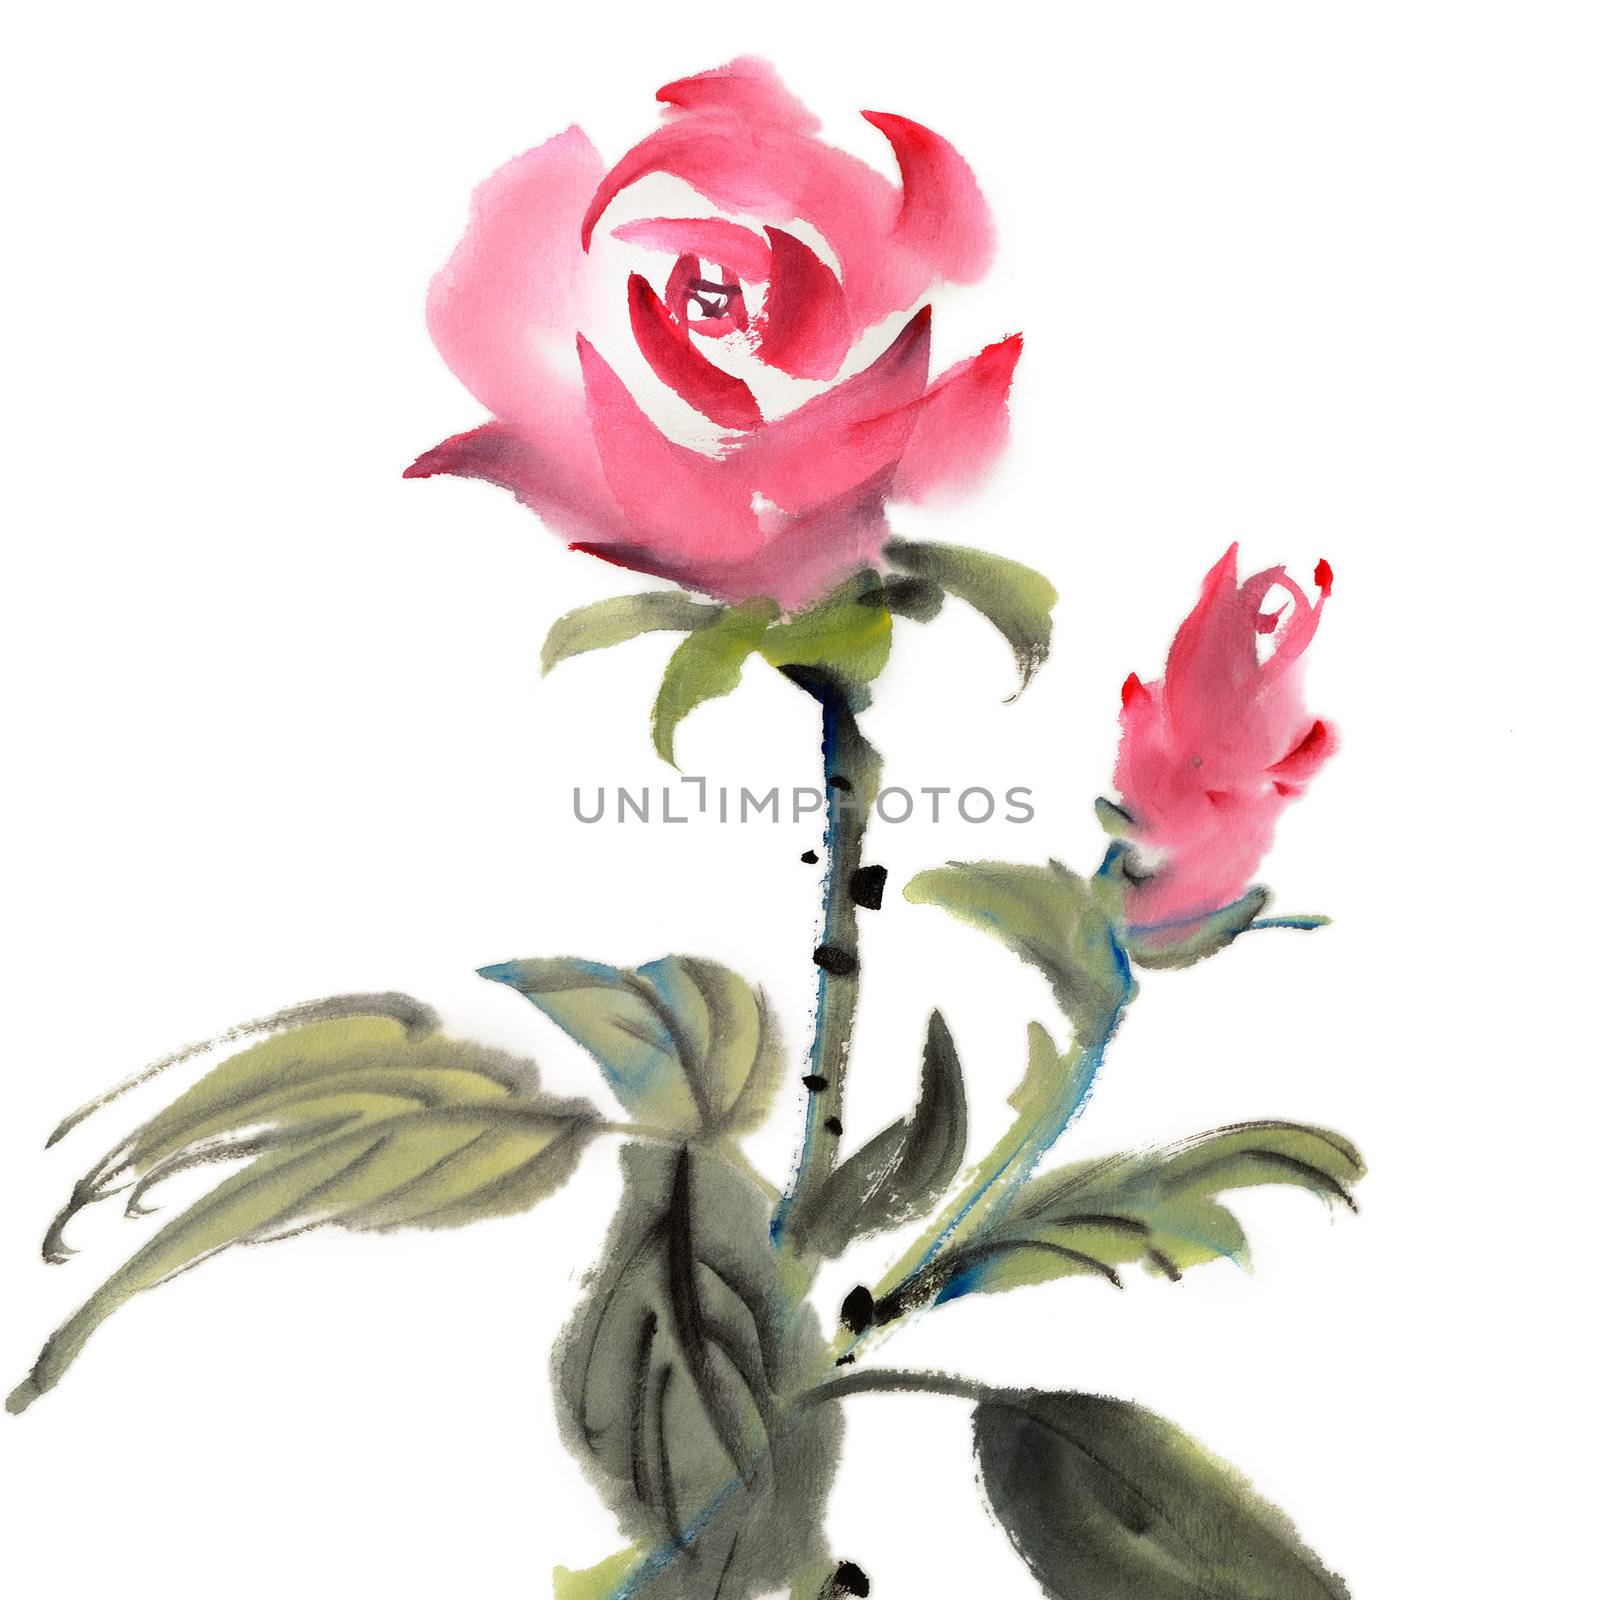 Chinese traditional painting of rose flower on white background.